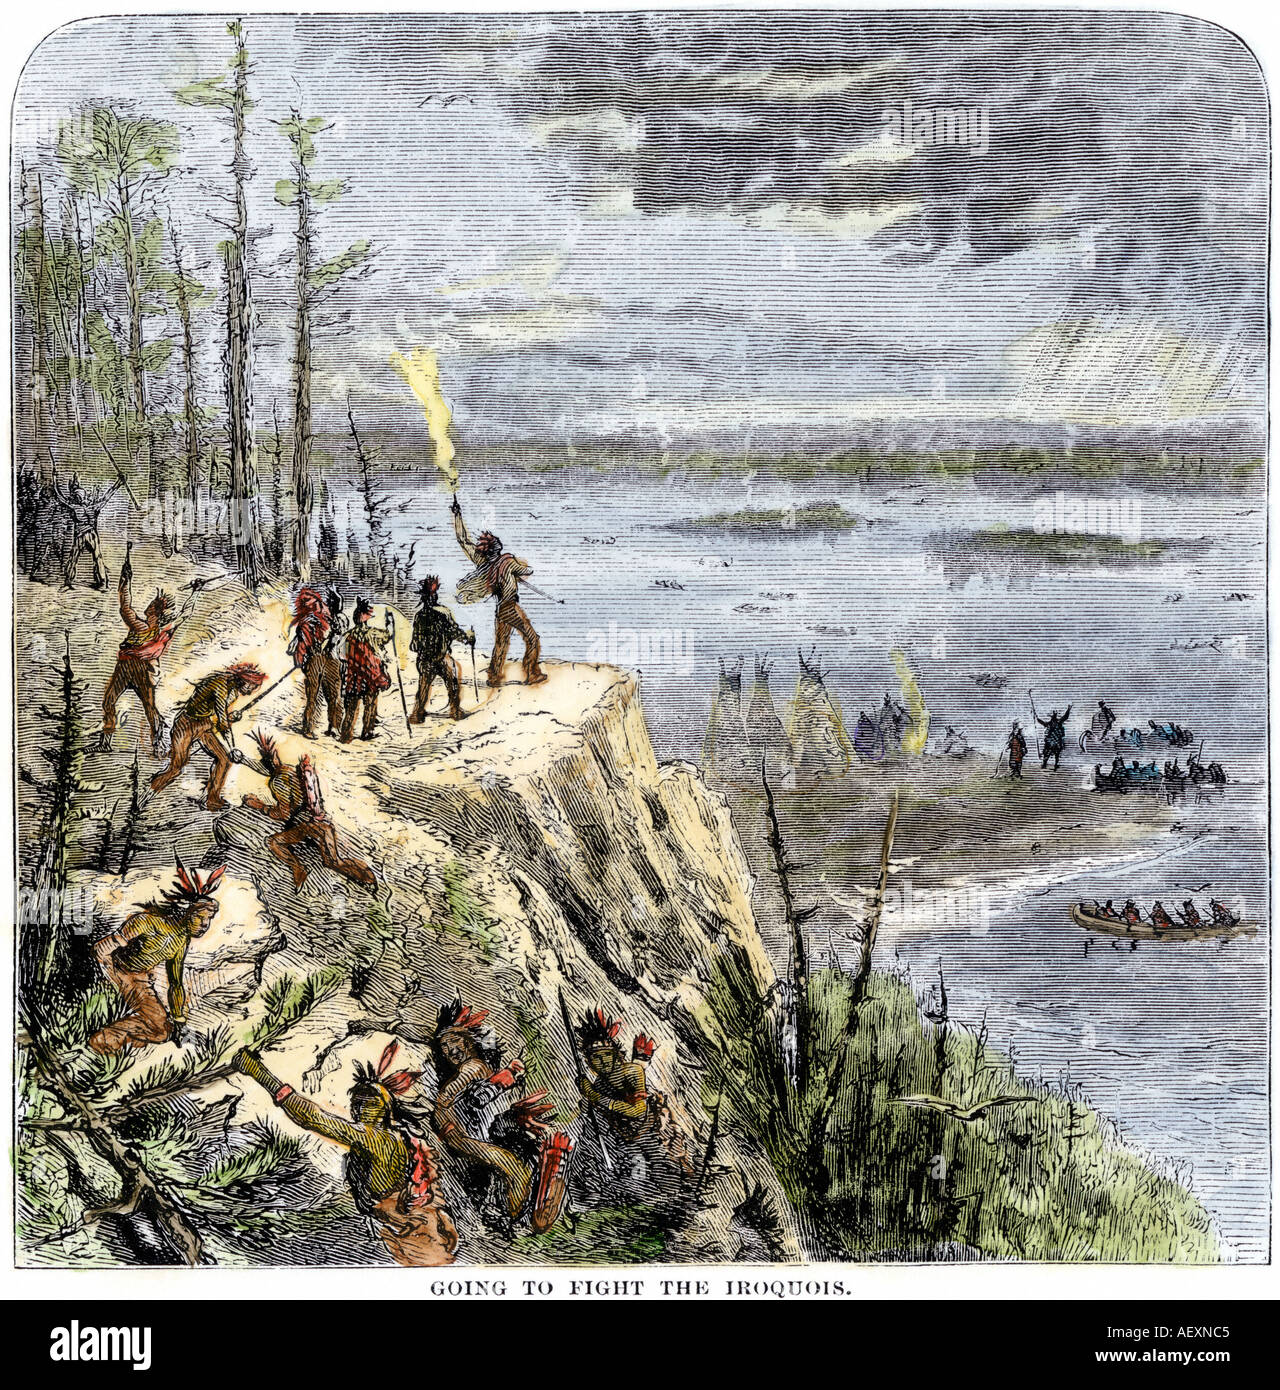 Samuel de Champlain and his Huron allies going to fight the Iroquois near Lake Champlain 1600s. Hand-colored woodcut Stock Photo